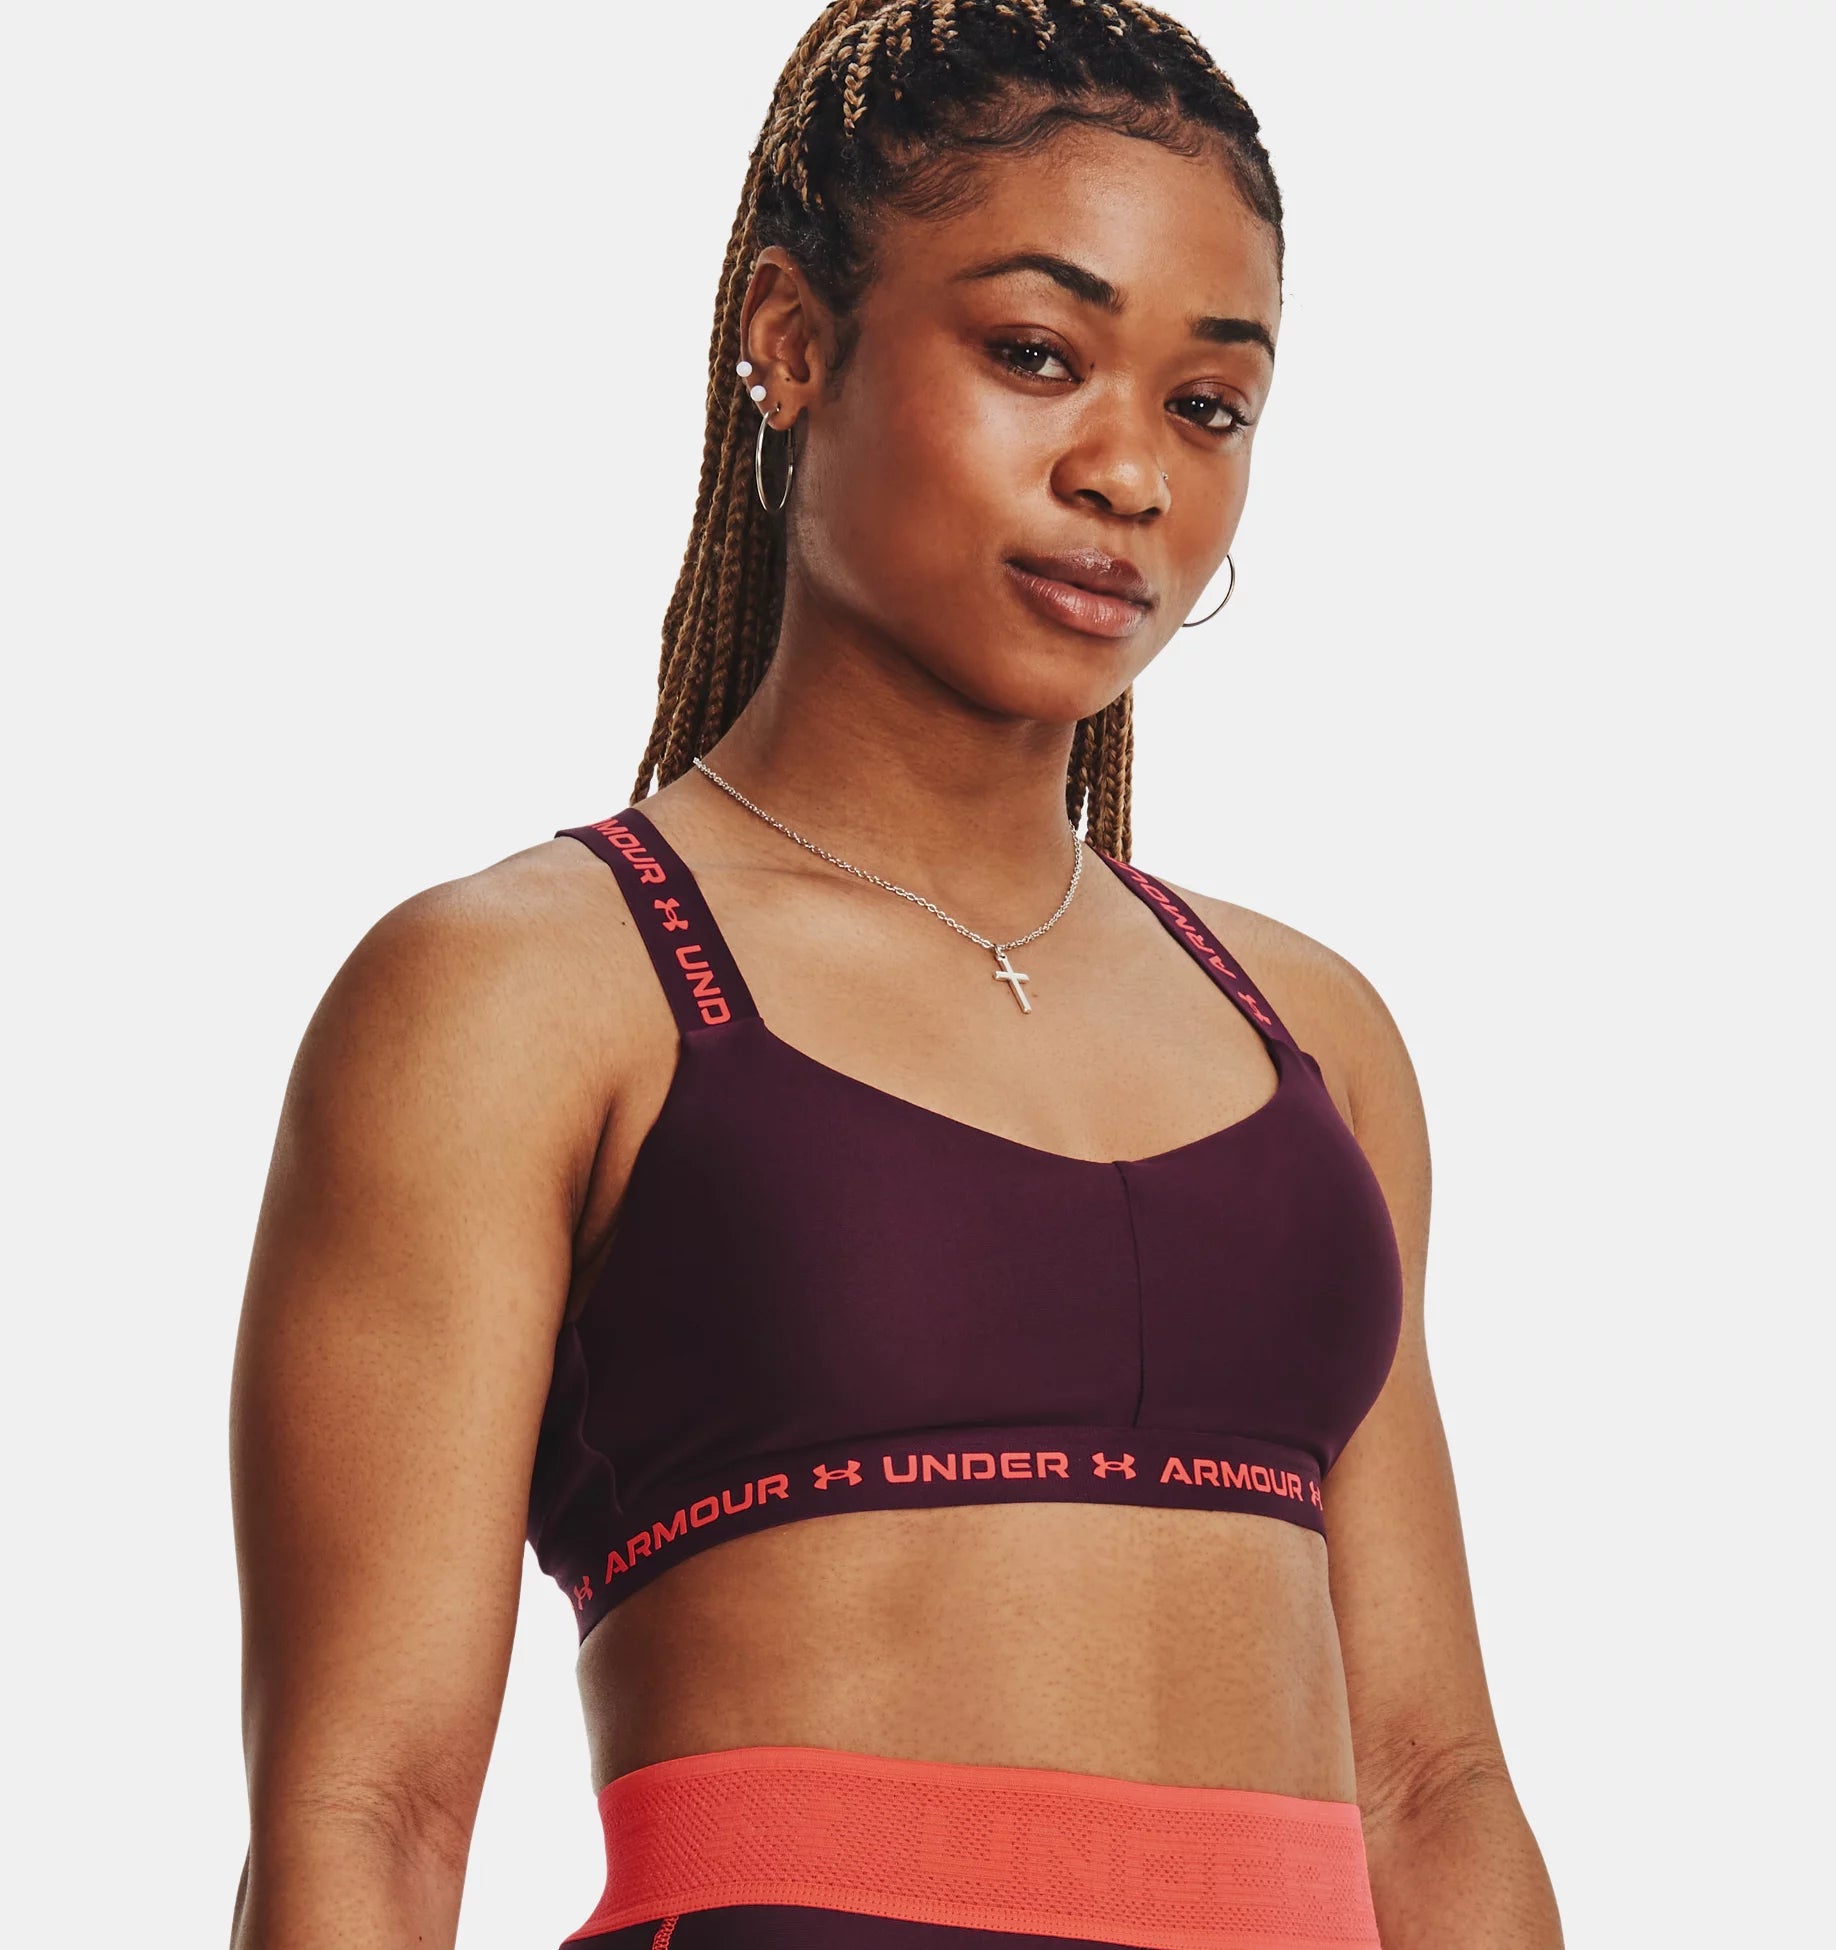  Under Armour Women's Armour Crossback Debossed Sports